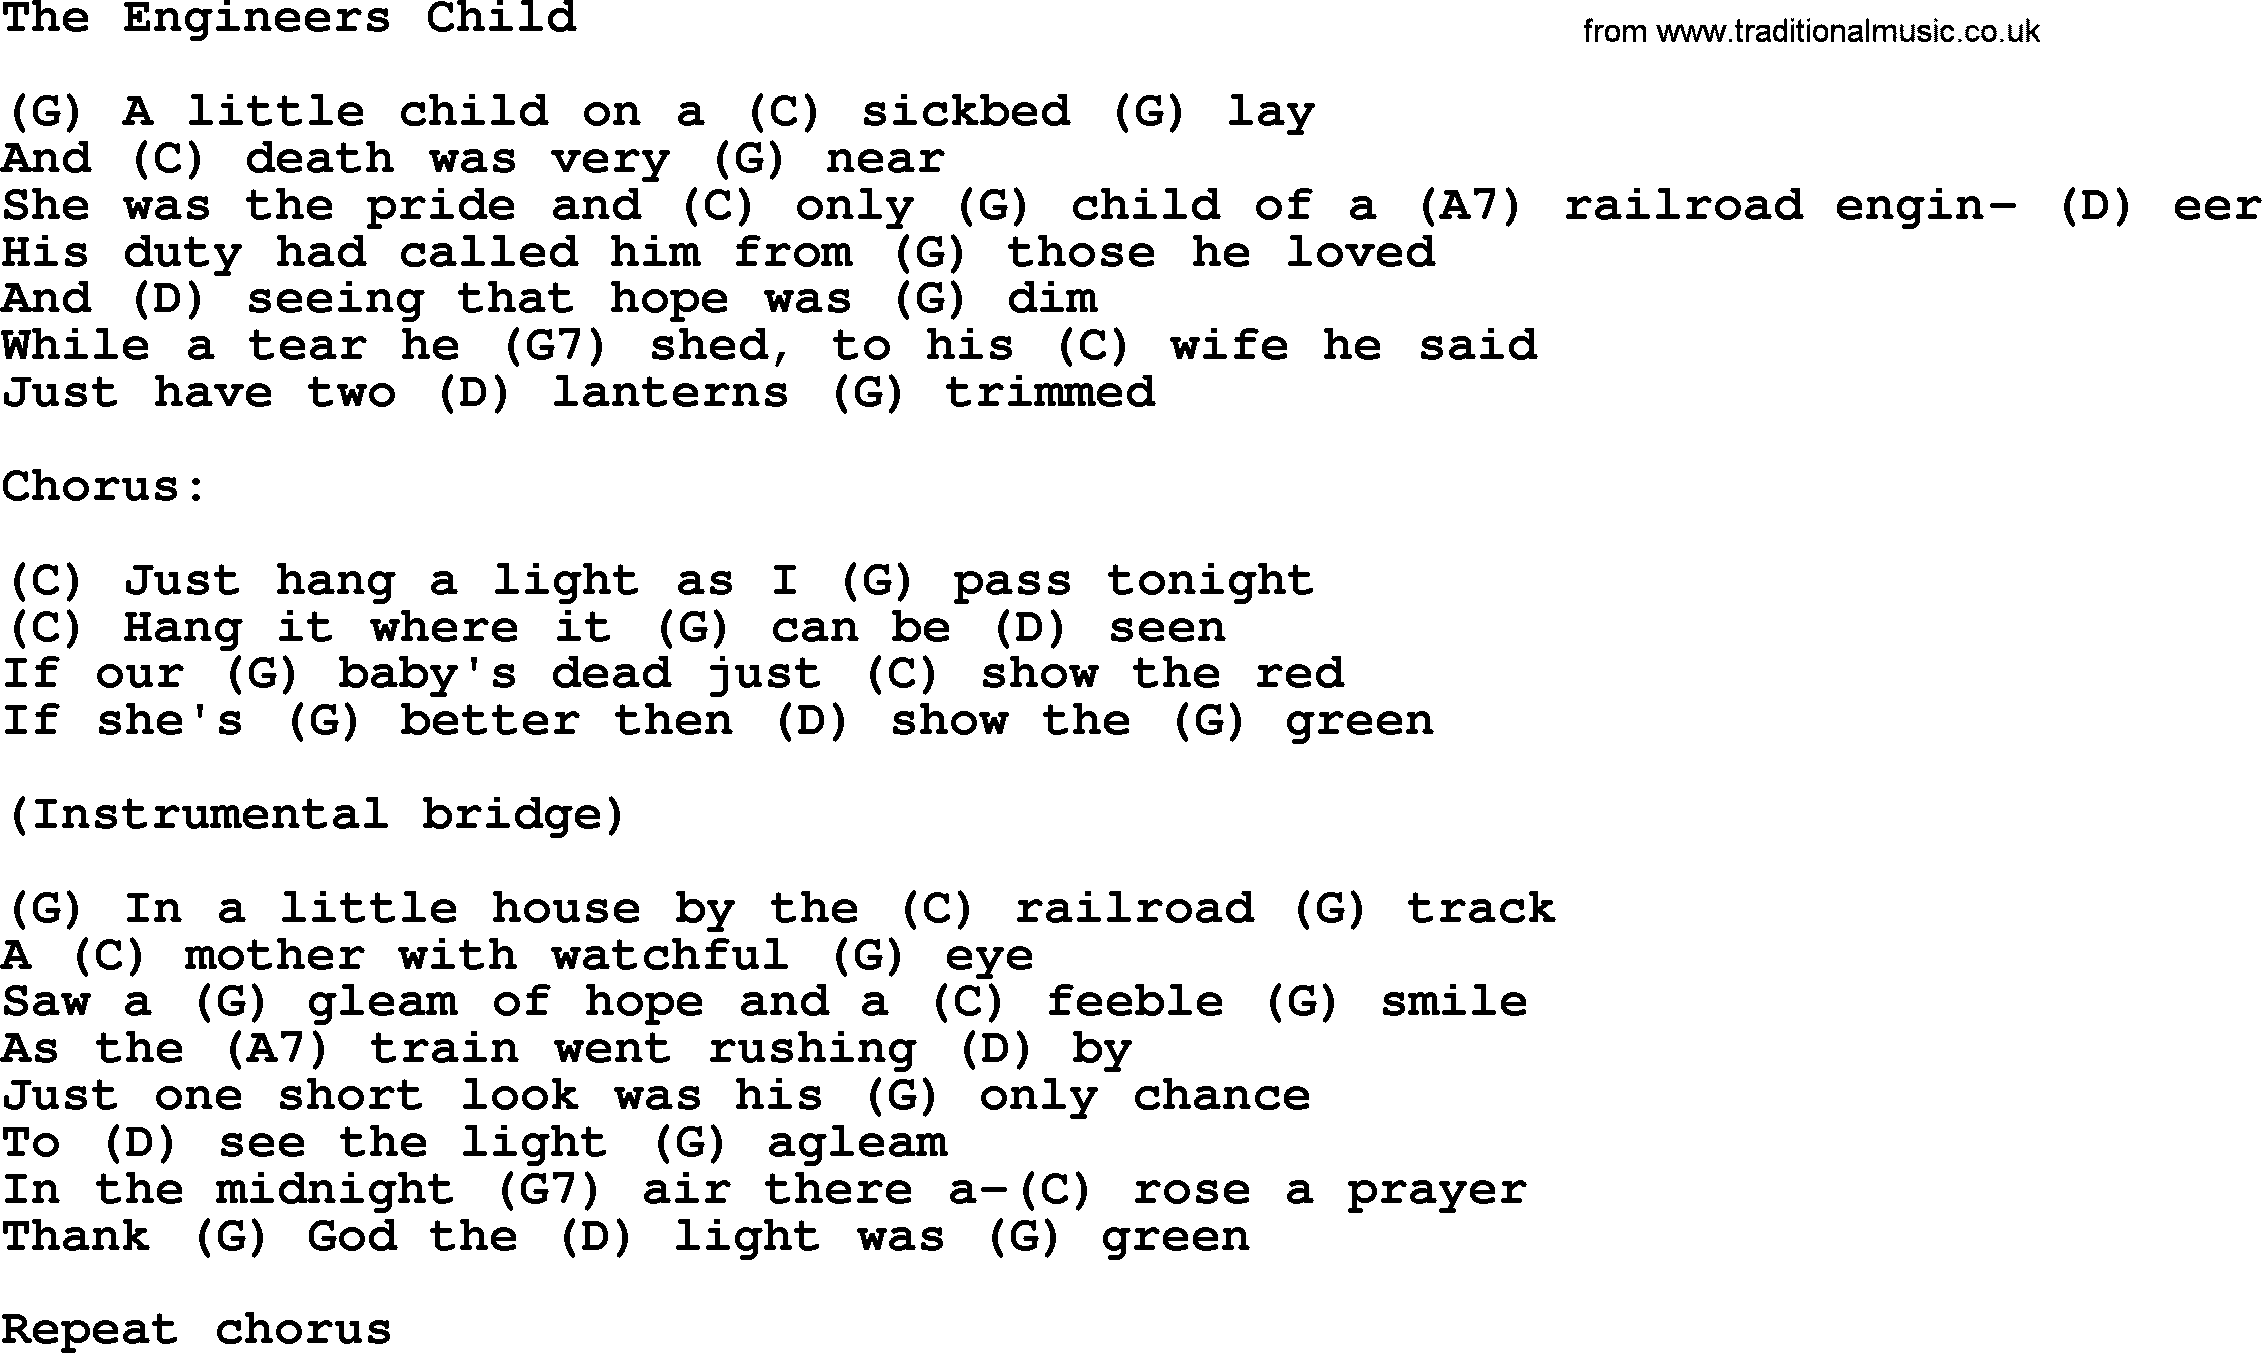 Bluegrass song: The Engineers Child, lyrics and chords